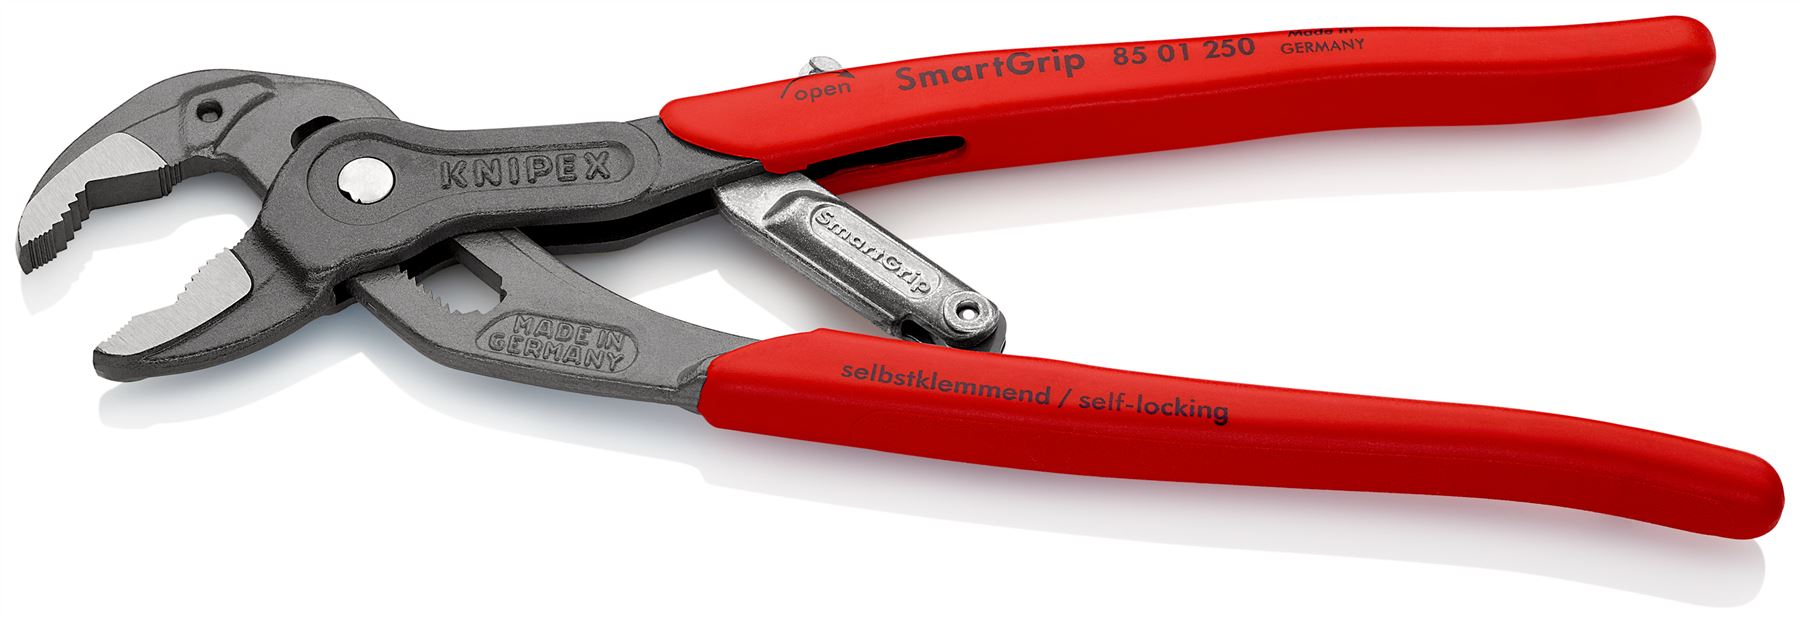 KNIPEX SmartGrip Water Pump Pliers with Automatic Adjustment 250mm Plastic Handles85 01 250 SB